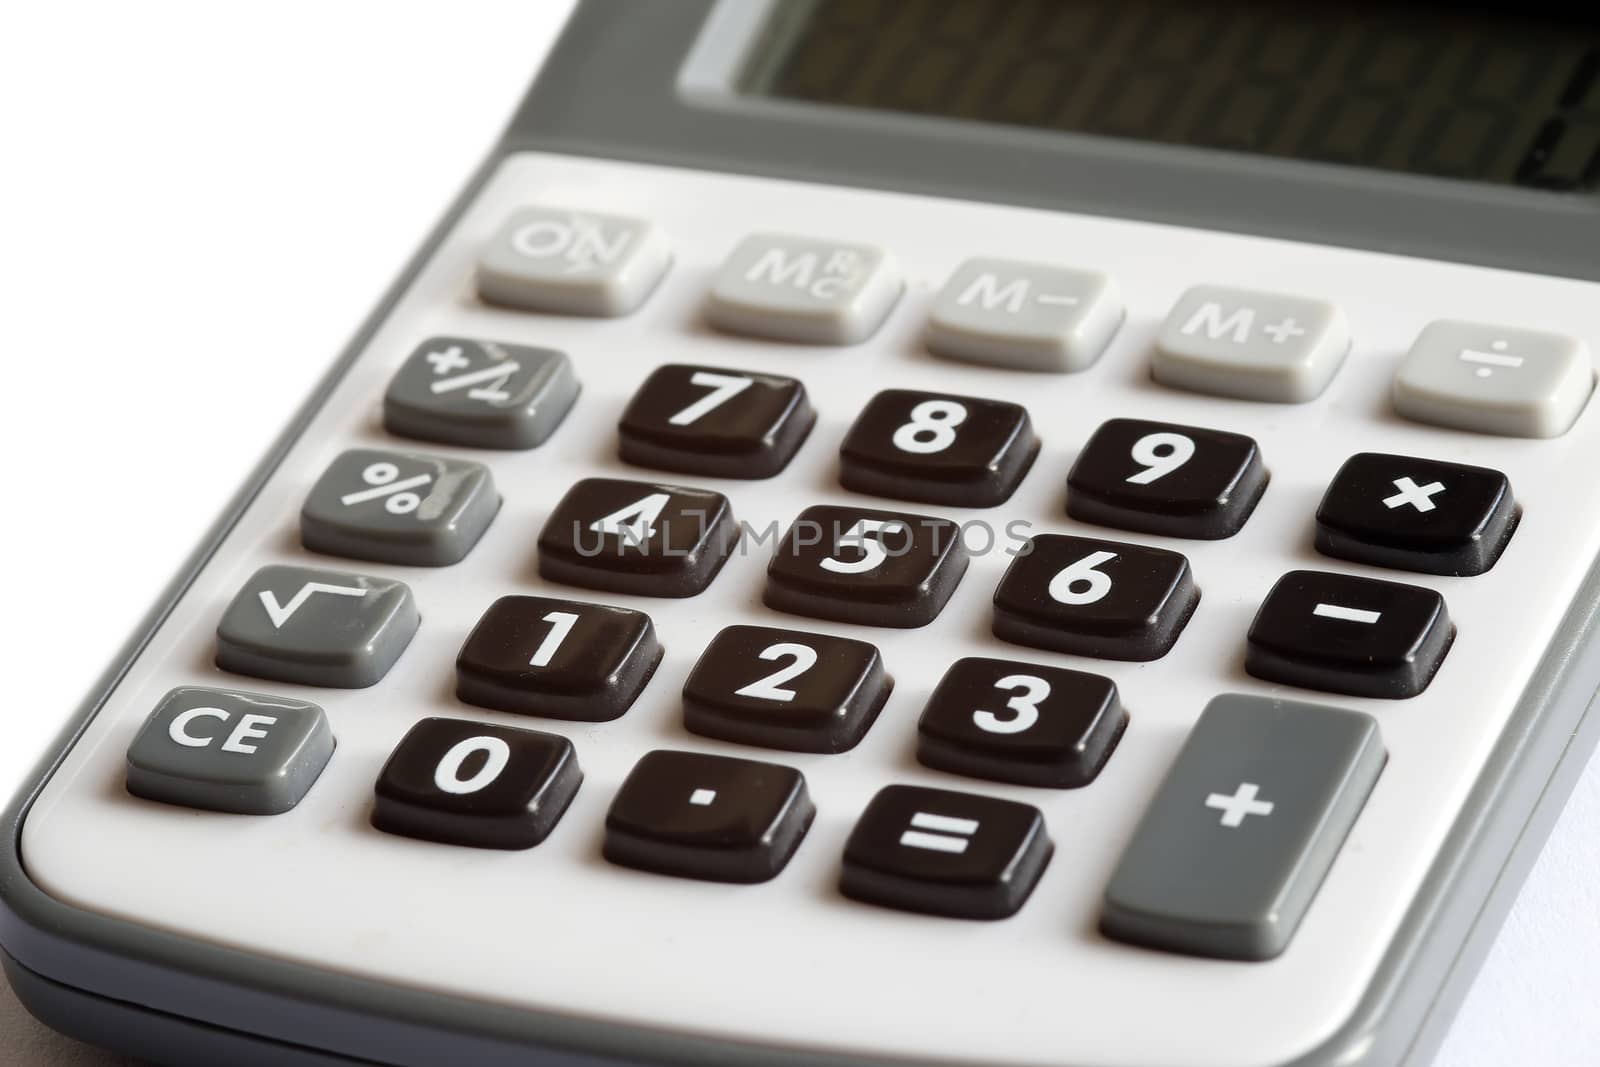 Calculator - counting of the financial position - charges and revenue - receipts and expenditure - poor prospects